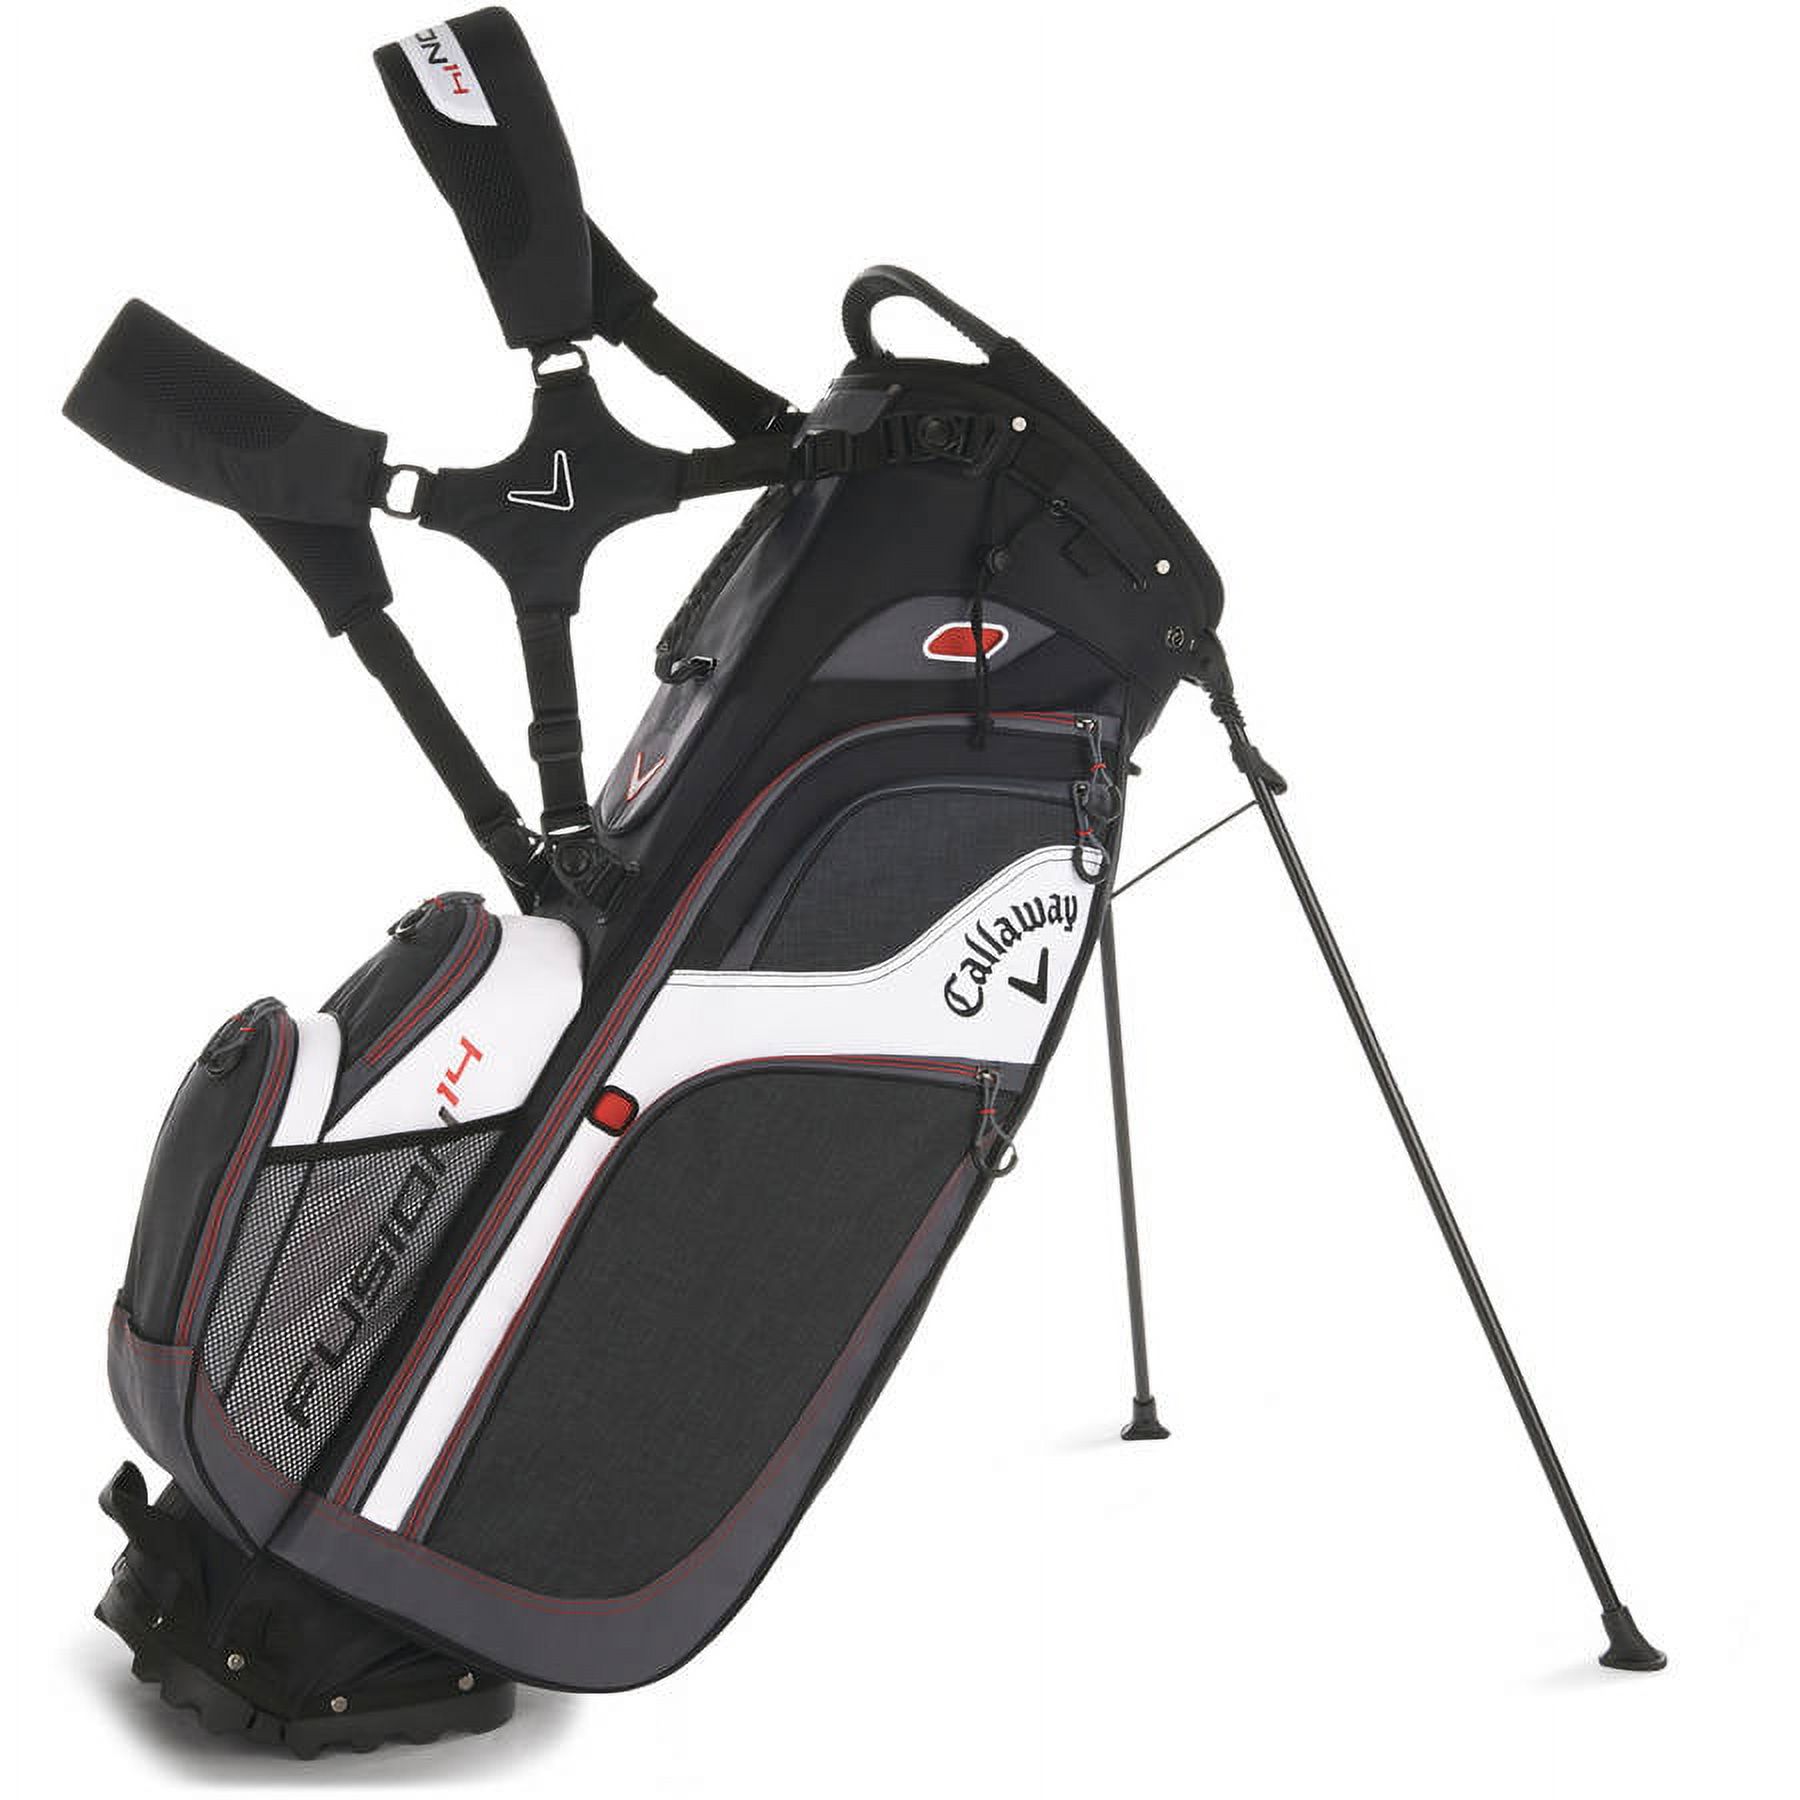 Callaway Fusion 14 Stand Bags Black/char - image 1 of 4